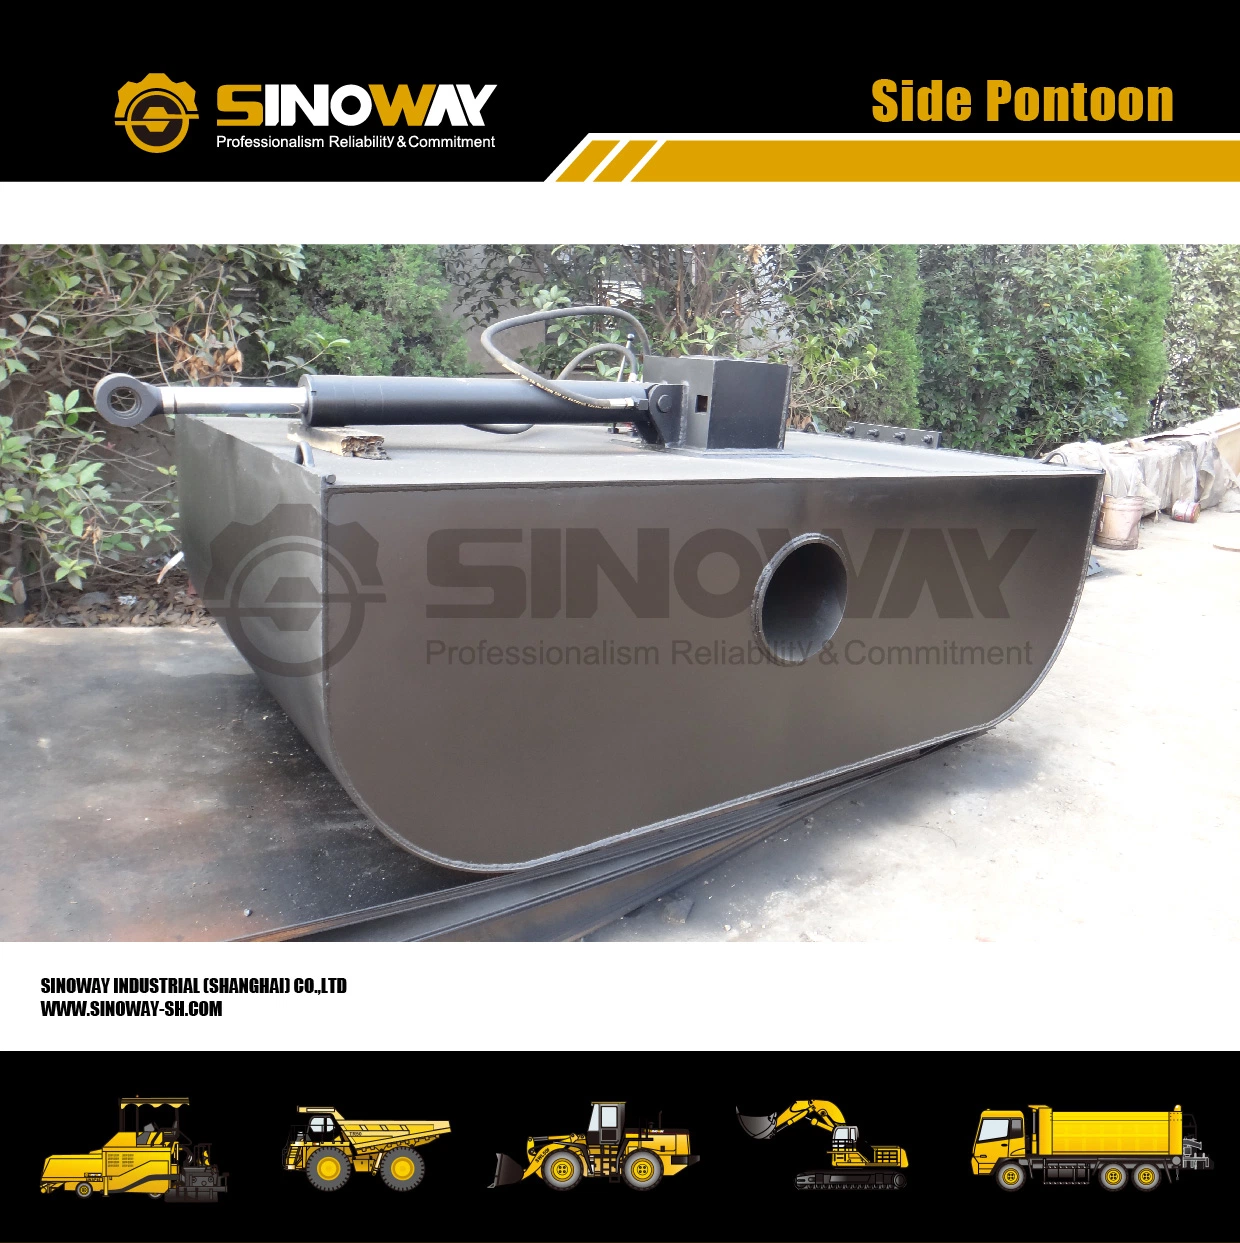 Hydraulic Floating Undercarriage Pontoons of Amphibious Excavator for Sale